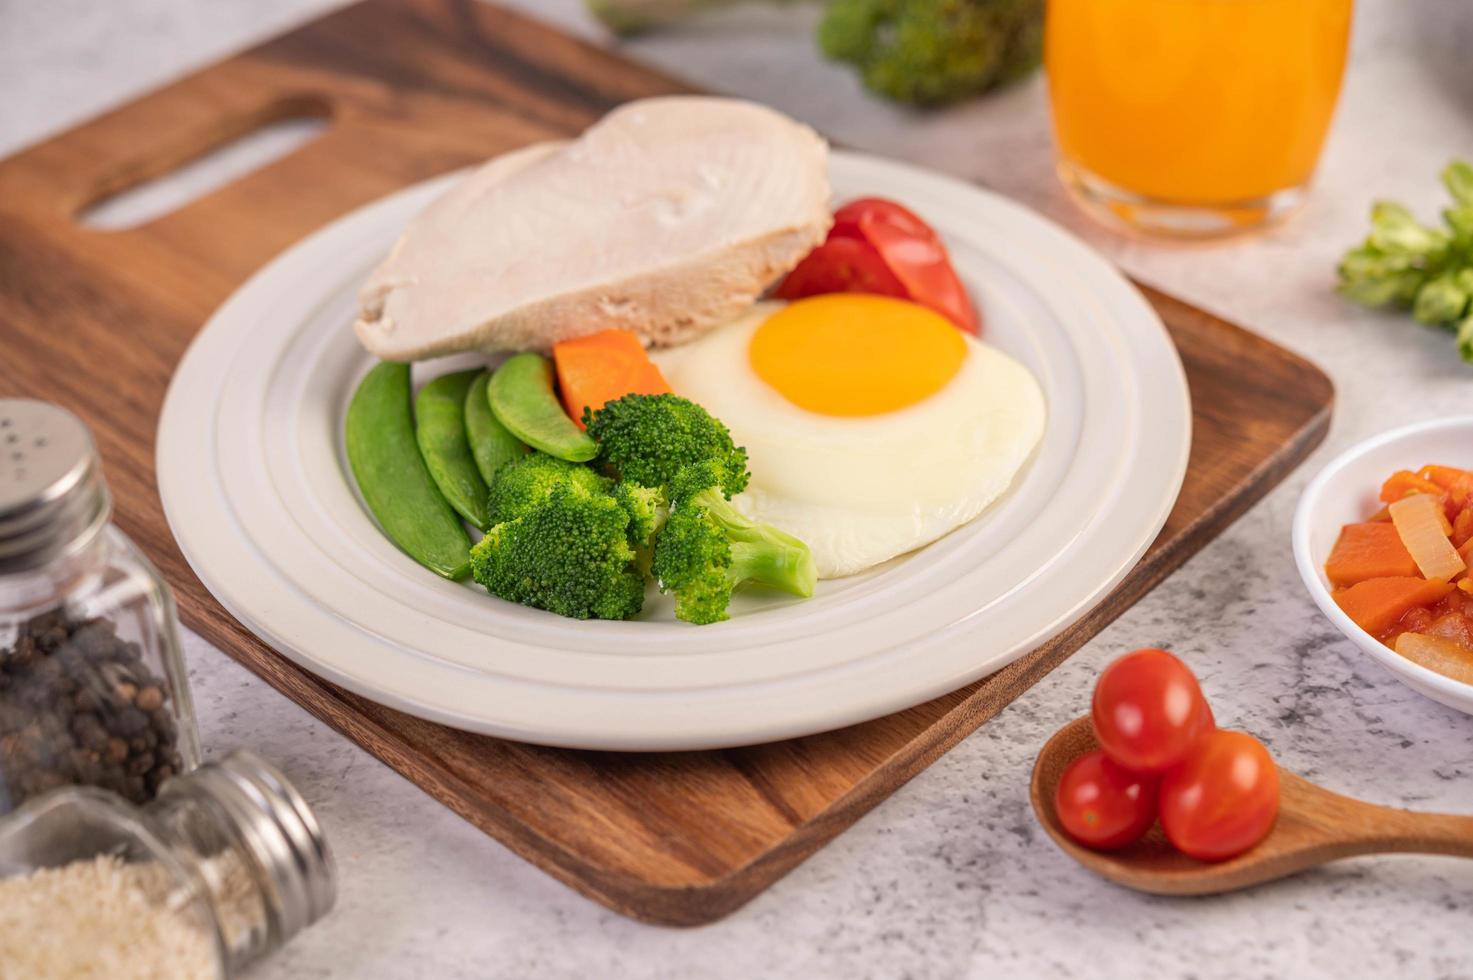 Breakfast spread of chicken, fried eggs, broccoli, carrots, tomatoes and lettuce photo